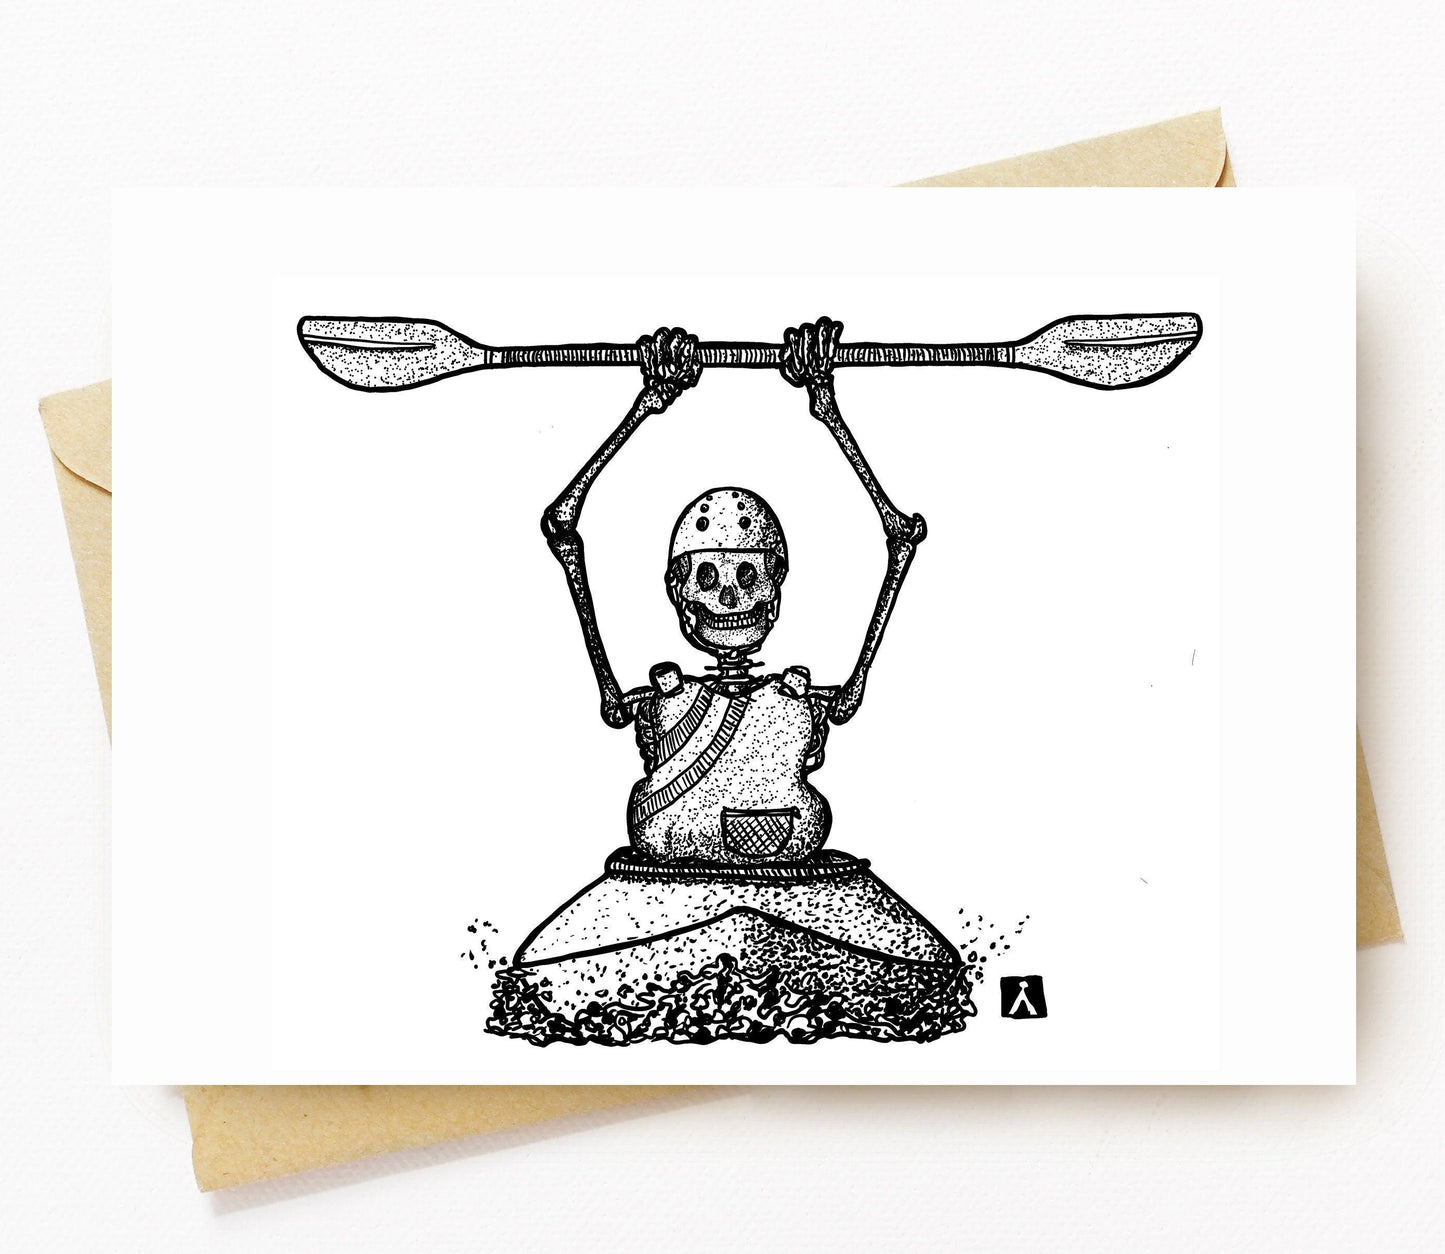 BellavanceInk: Greeting Card With Skeleton Whitewater Kayaking Down The River Styx 5 x 7 Inches - BellavanceInk